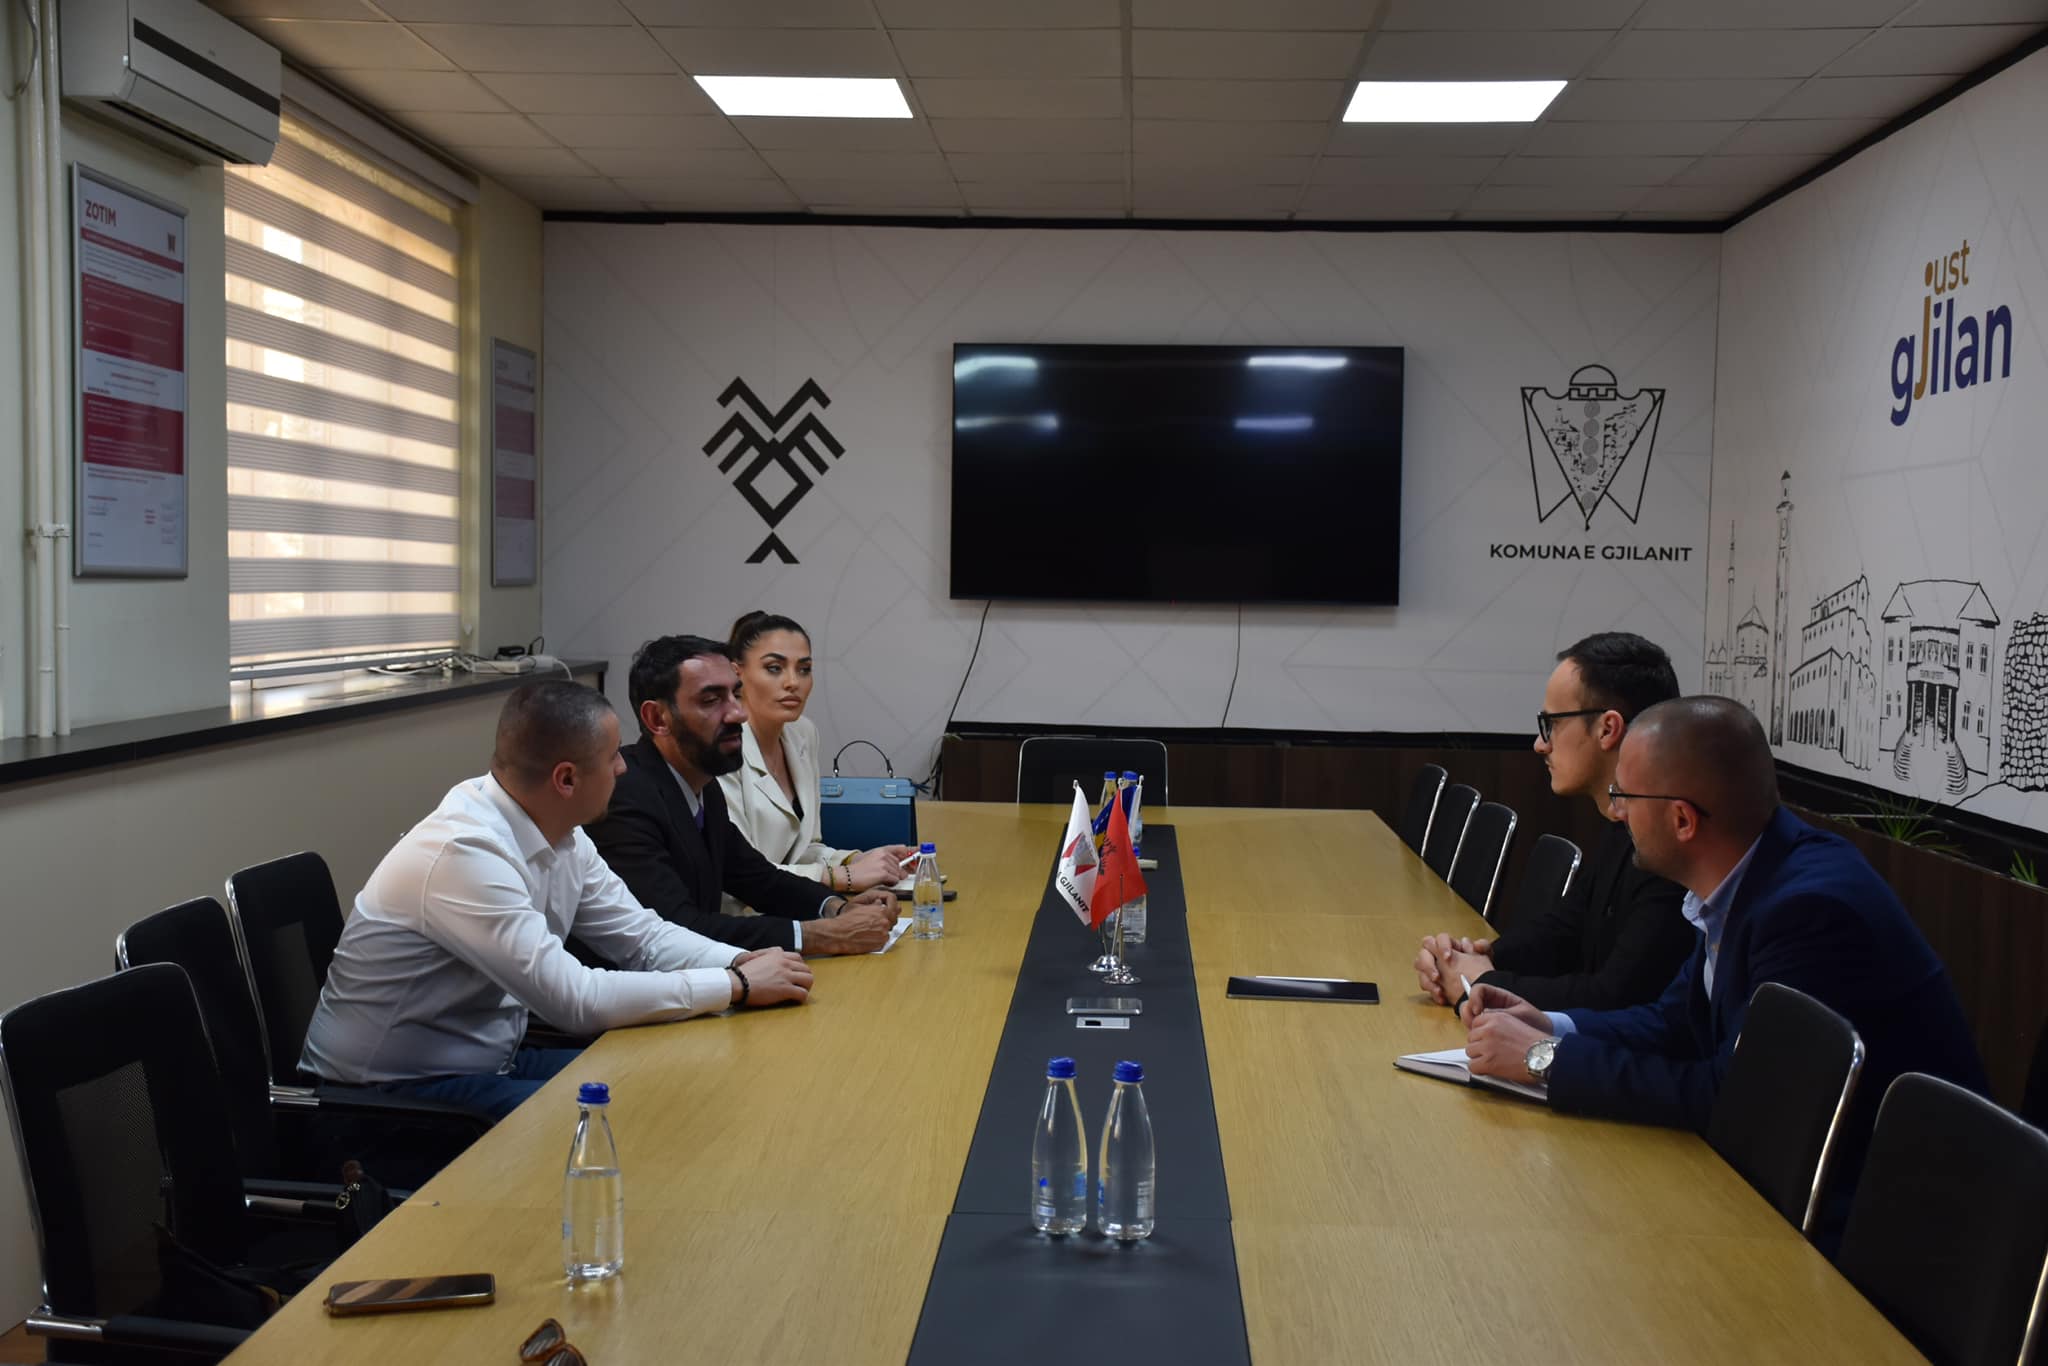 The Ministry of Regional Development holds a working meeting with the Mayor of the municipality of Gjilan.